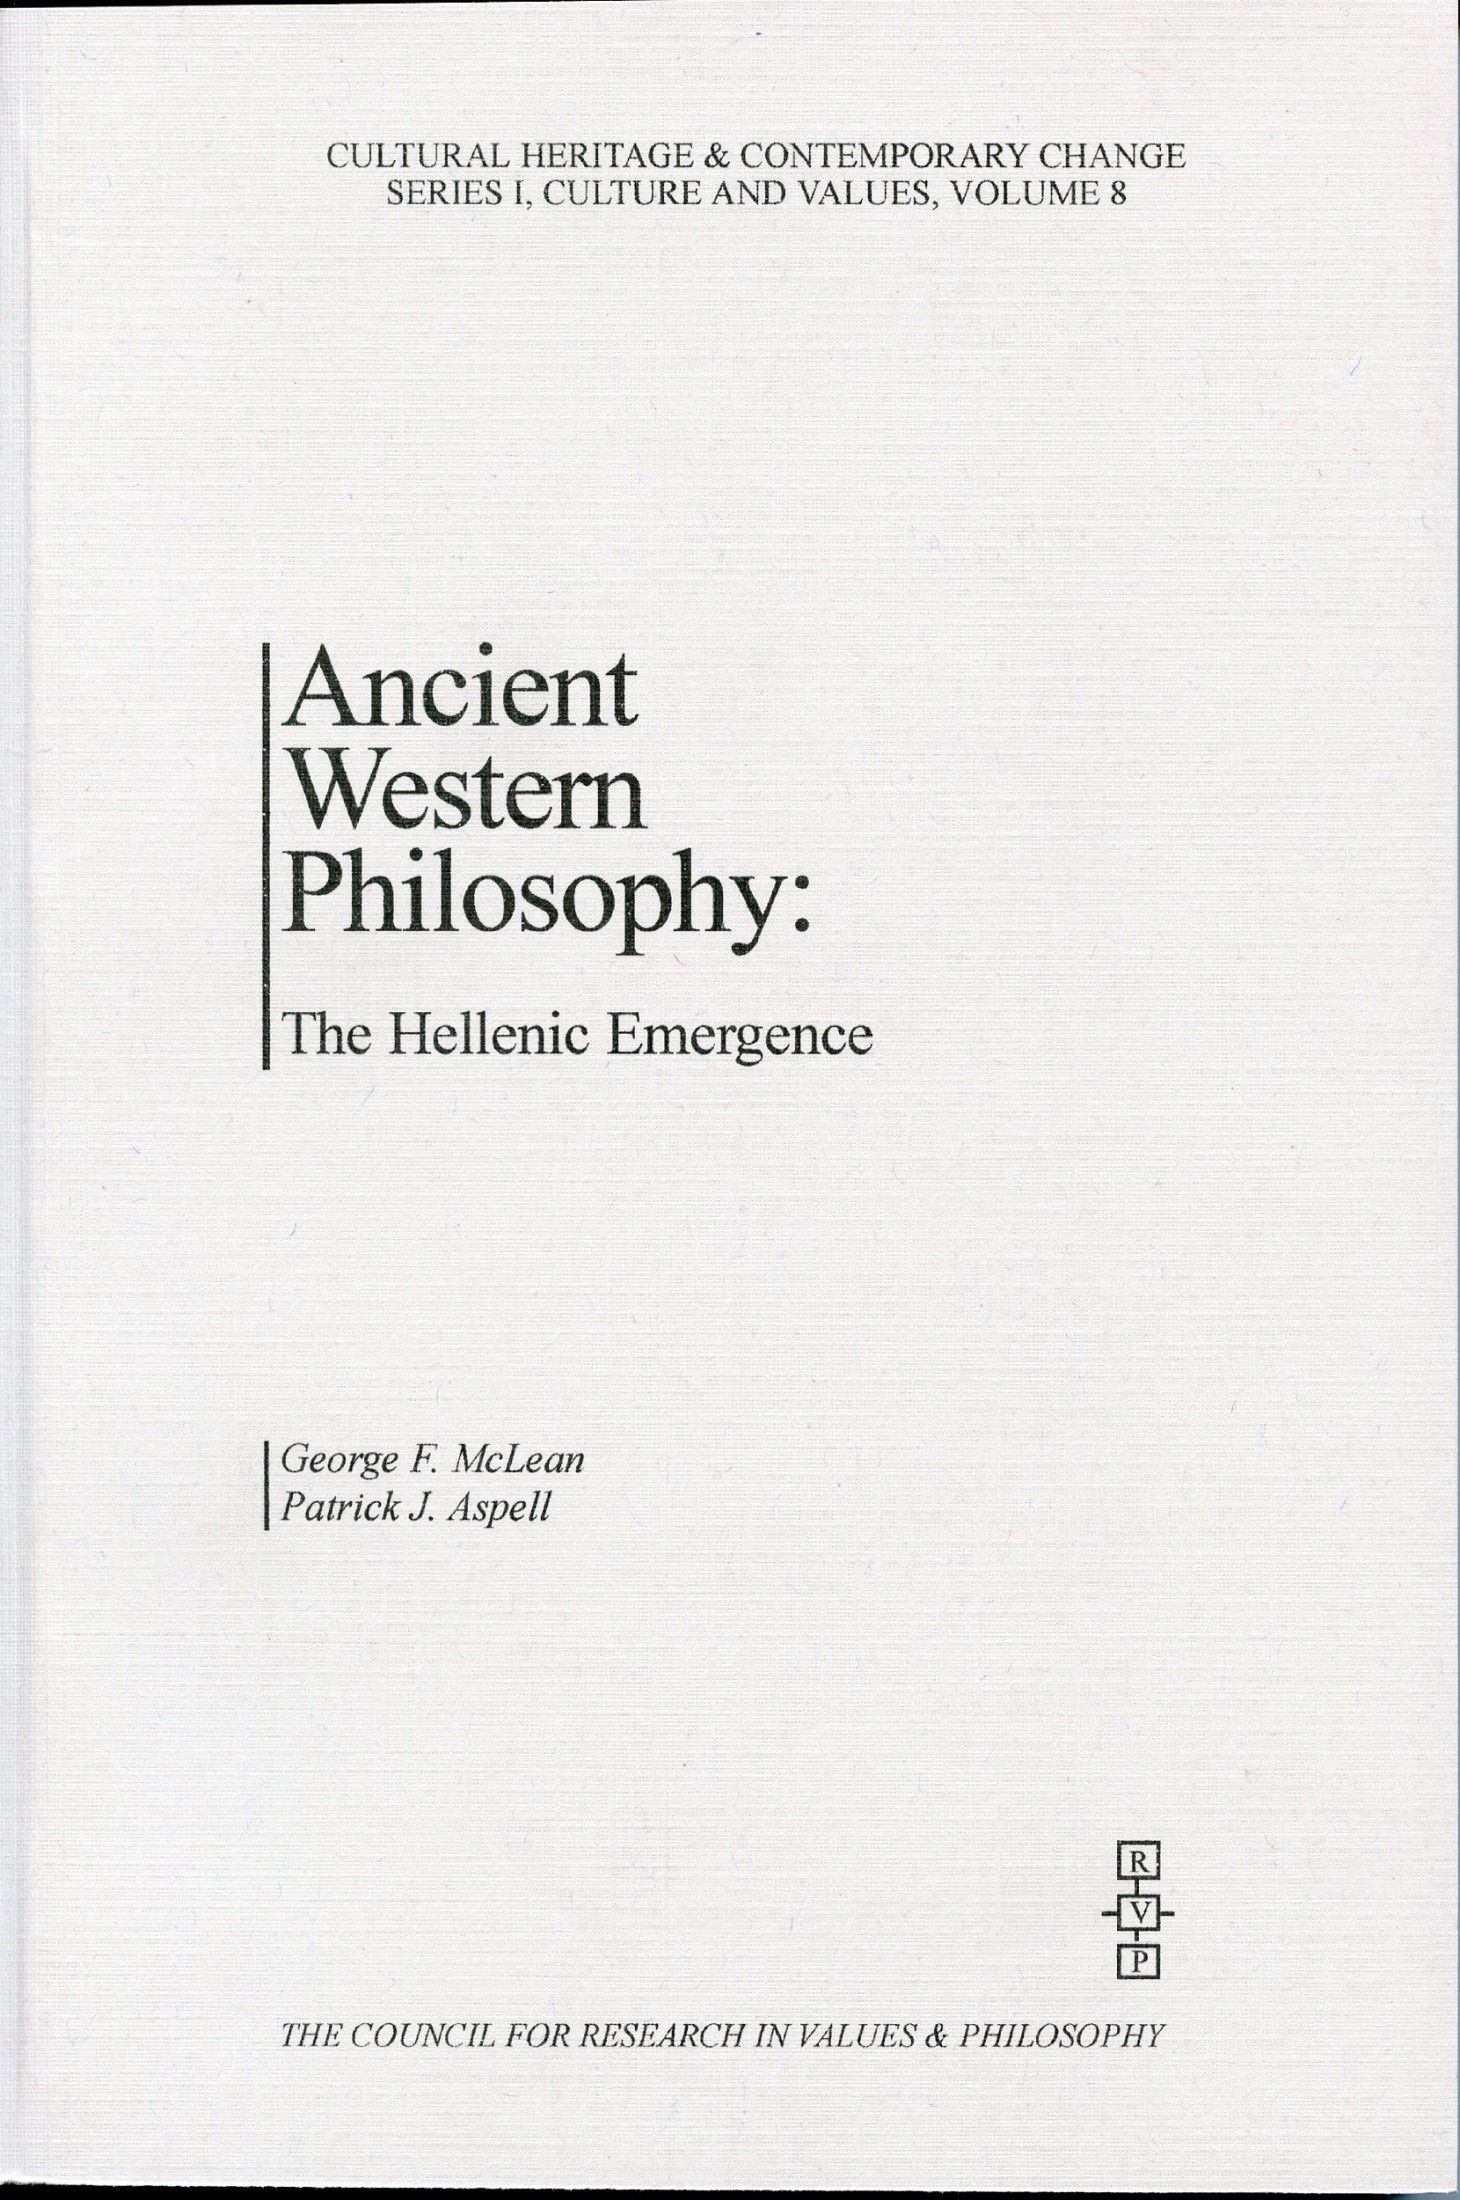 Ancient Western Philosophy: The Hellenic Emergence